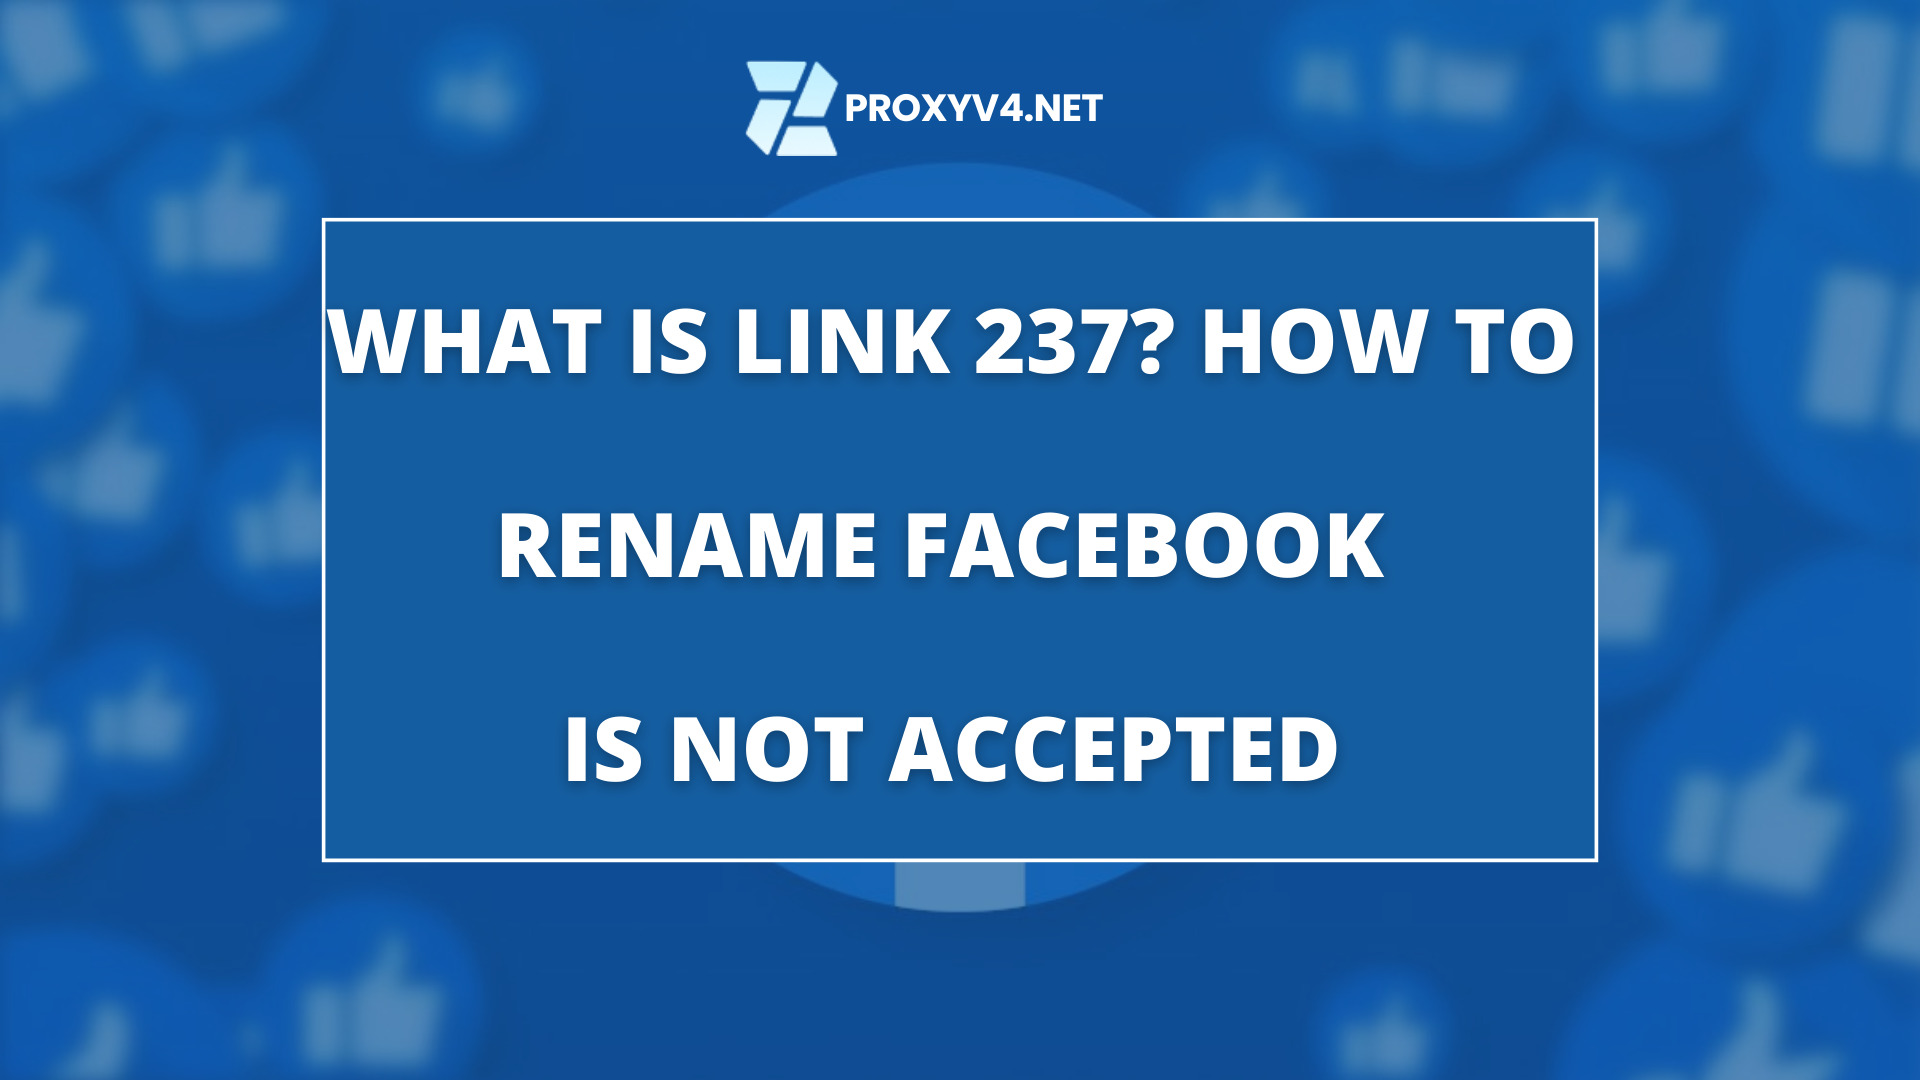 What is Link 237? How to rename Facebook is not accepted